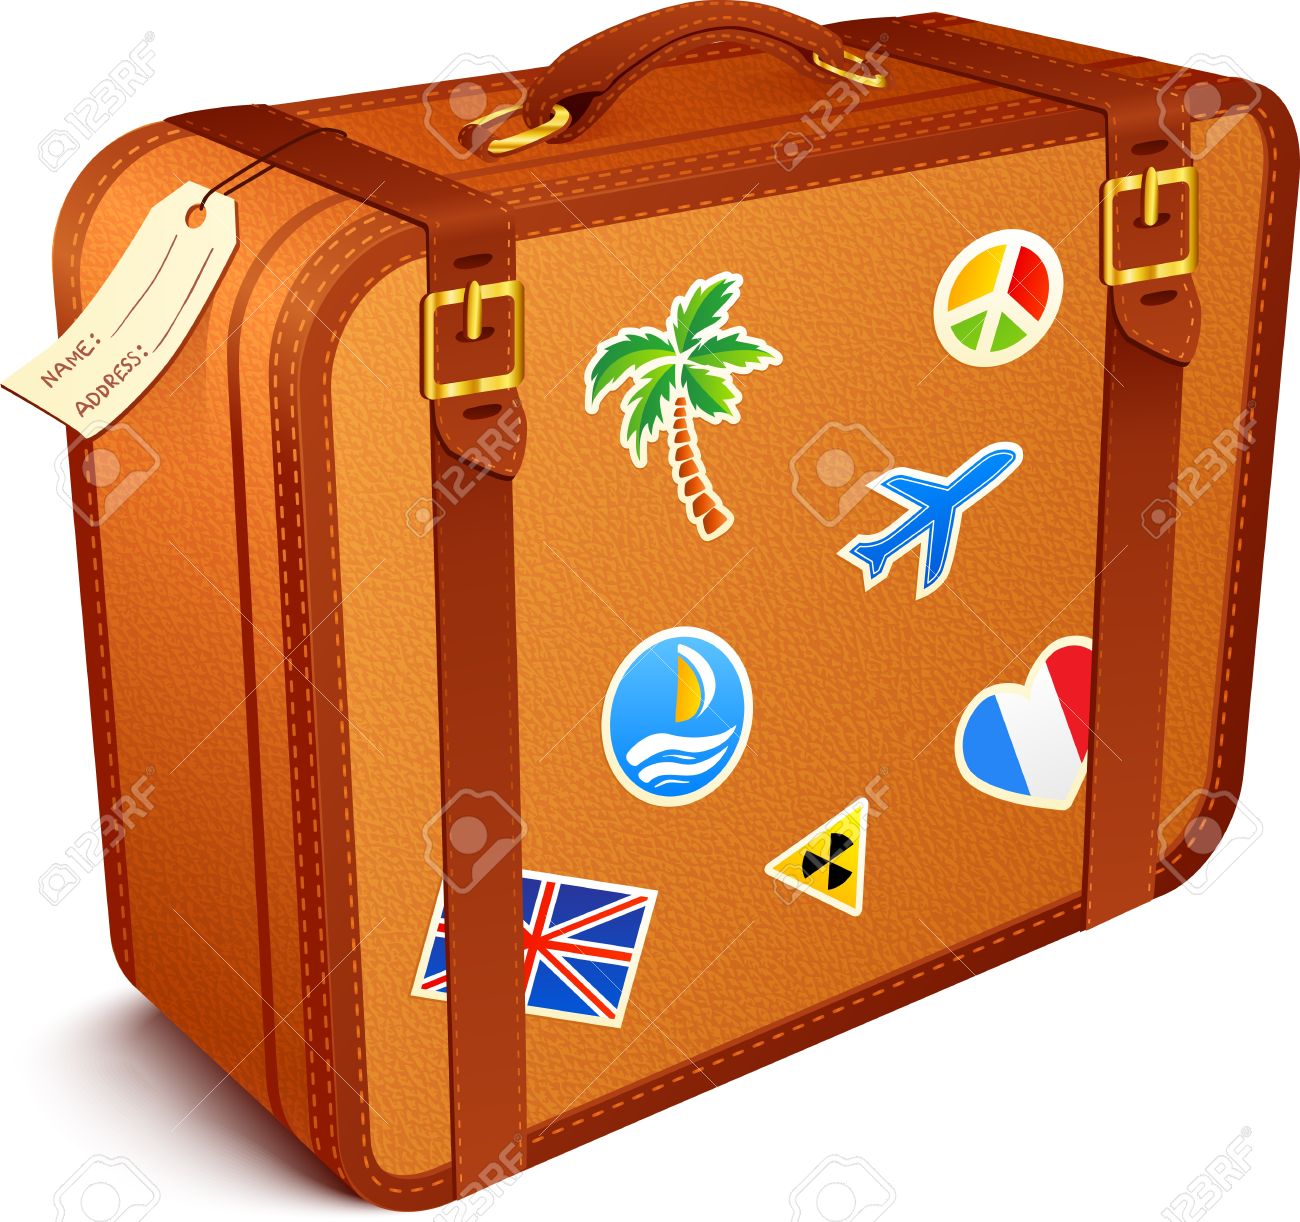 Suitcase Clipart-Clipartlook.